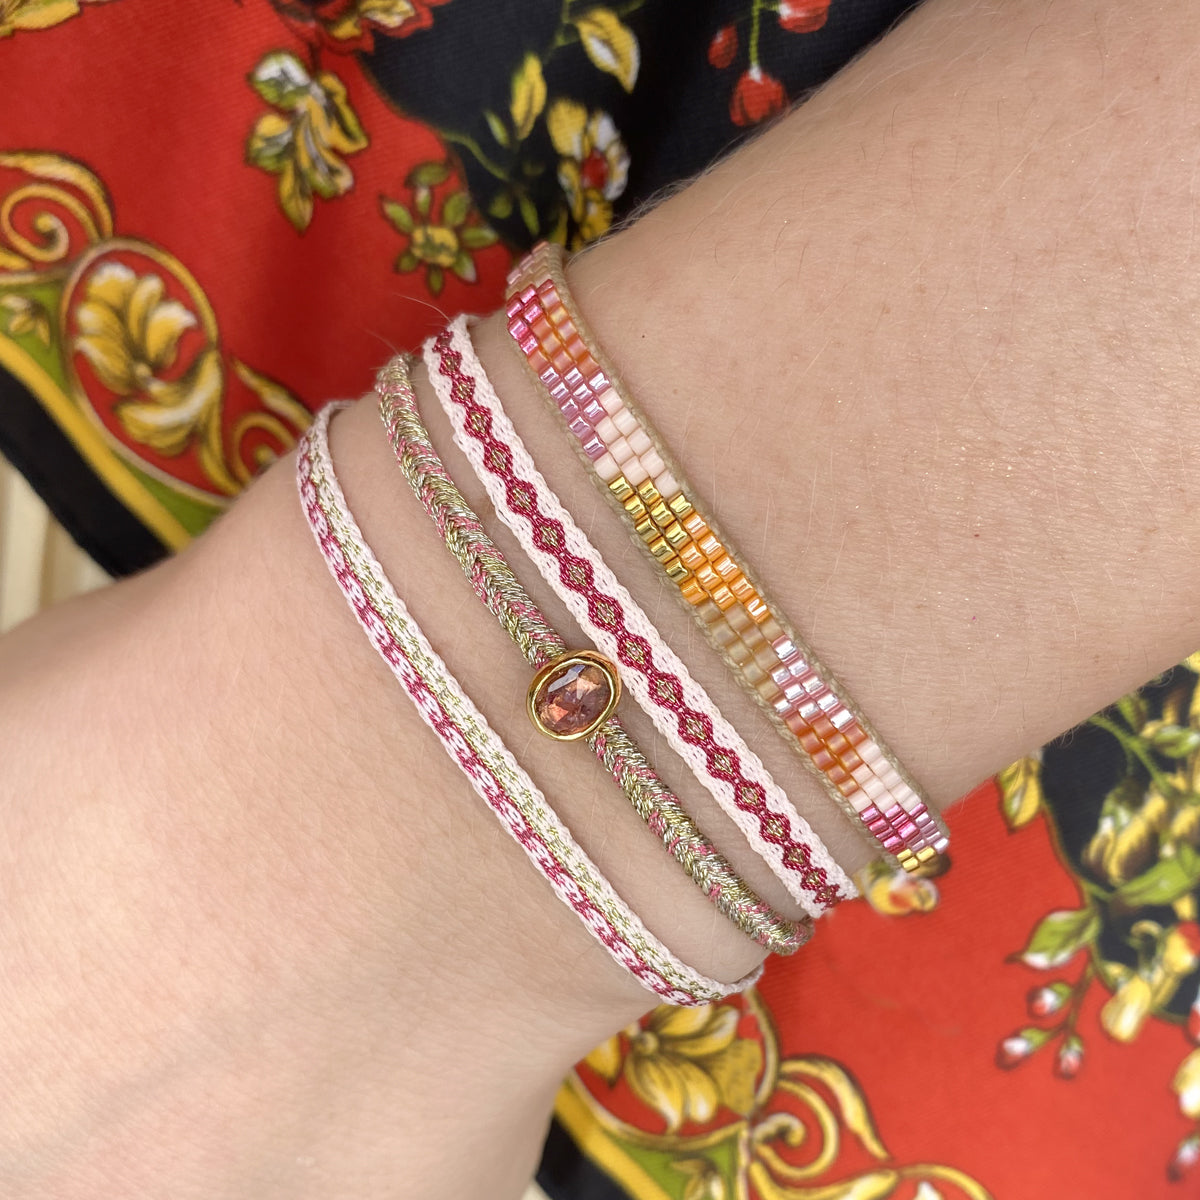 HANDWOVEN BASIC SPARKLE BRACELET IN PINK AND GOLD